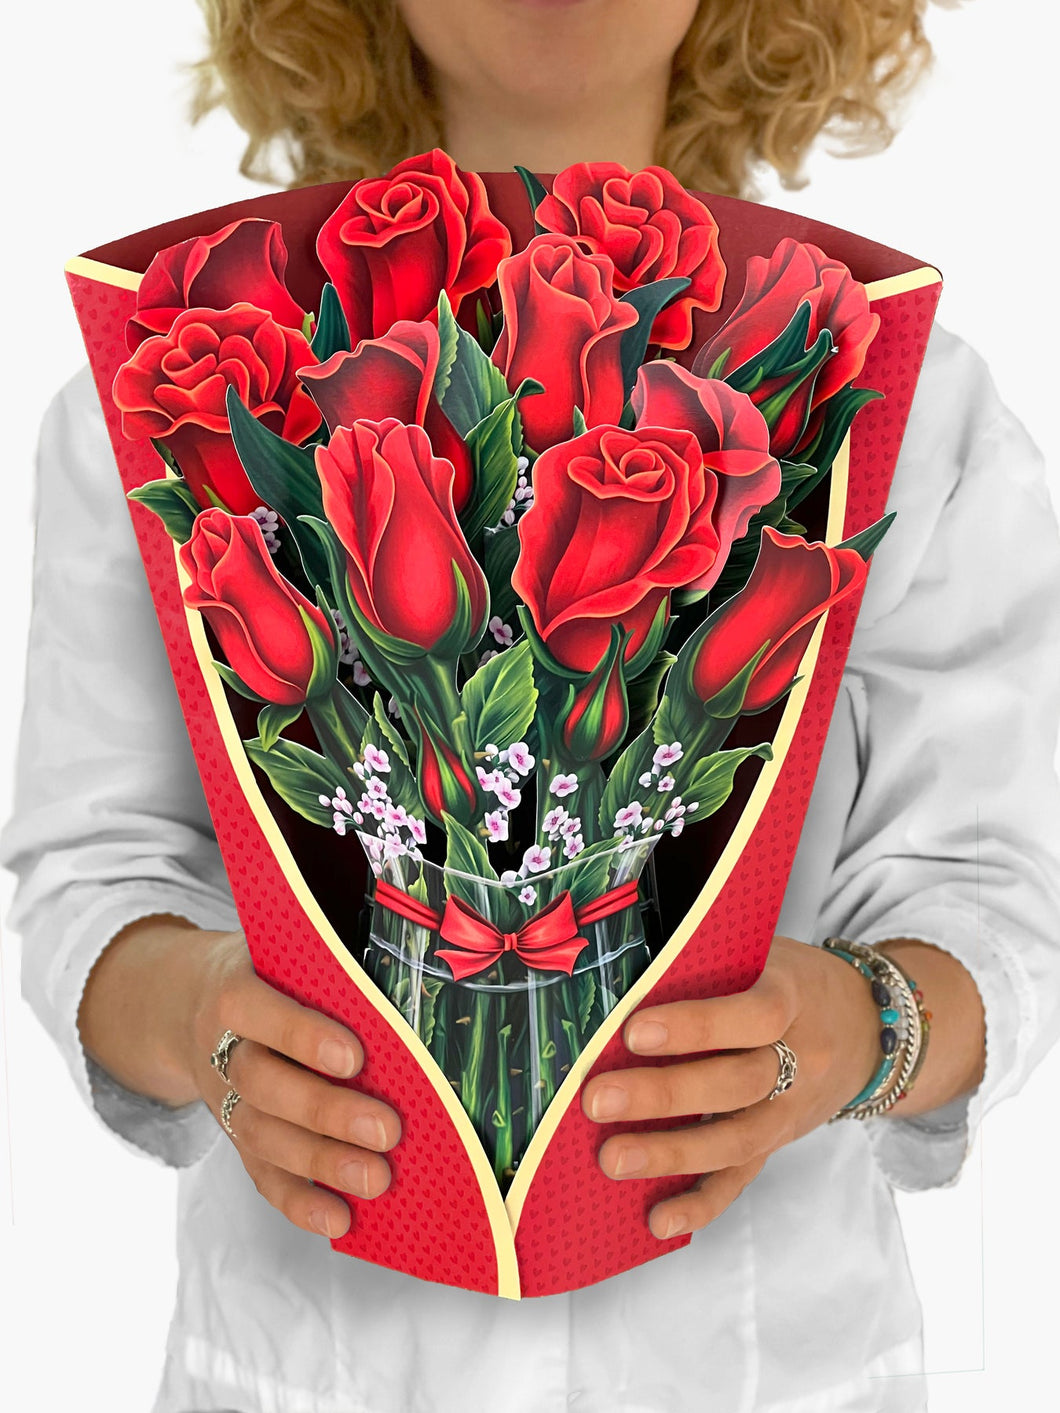 Red Roses - Pop Up Flower Bouquet